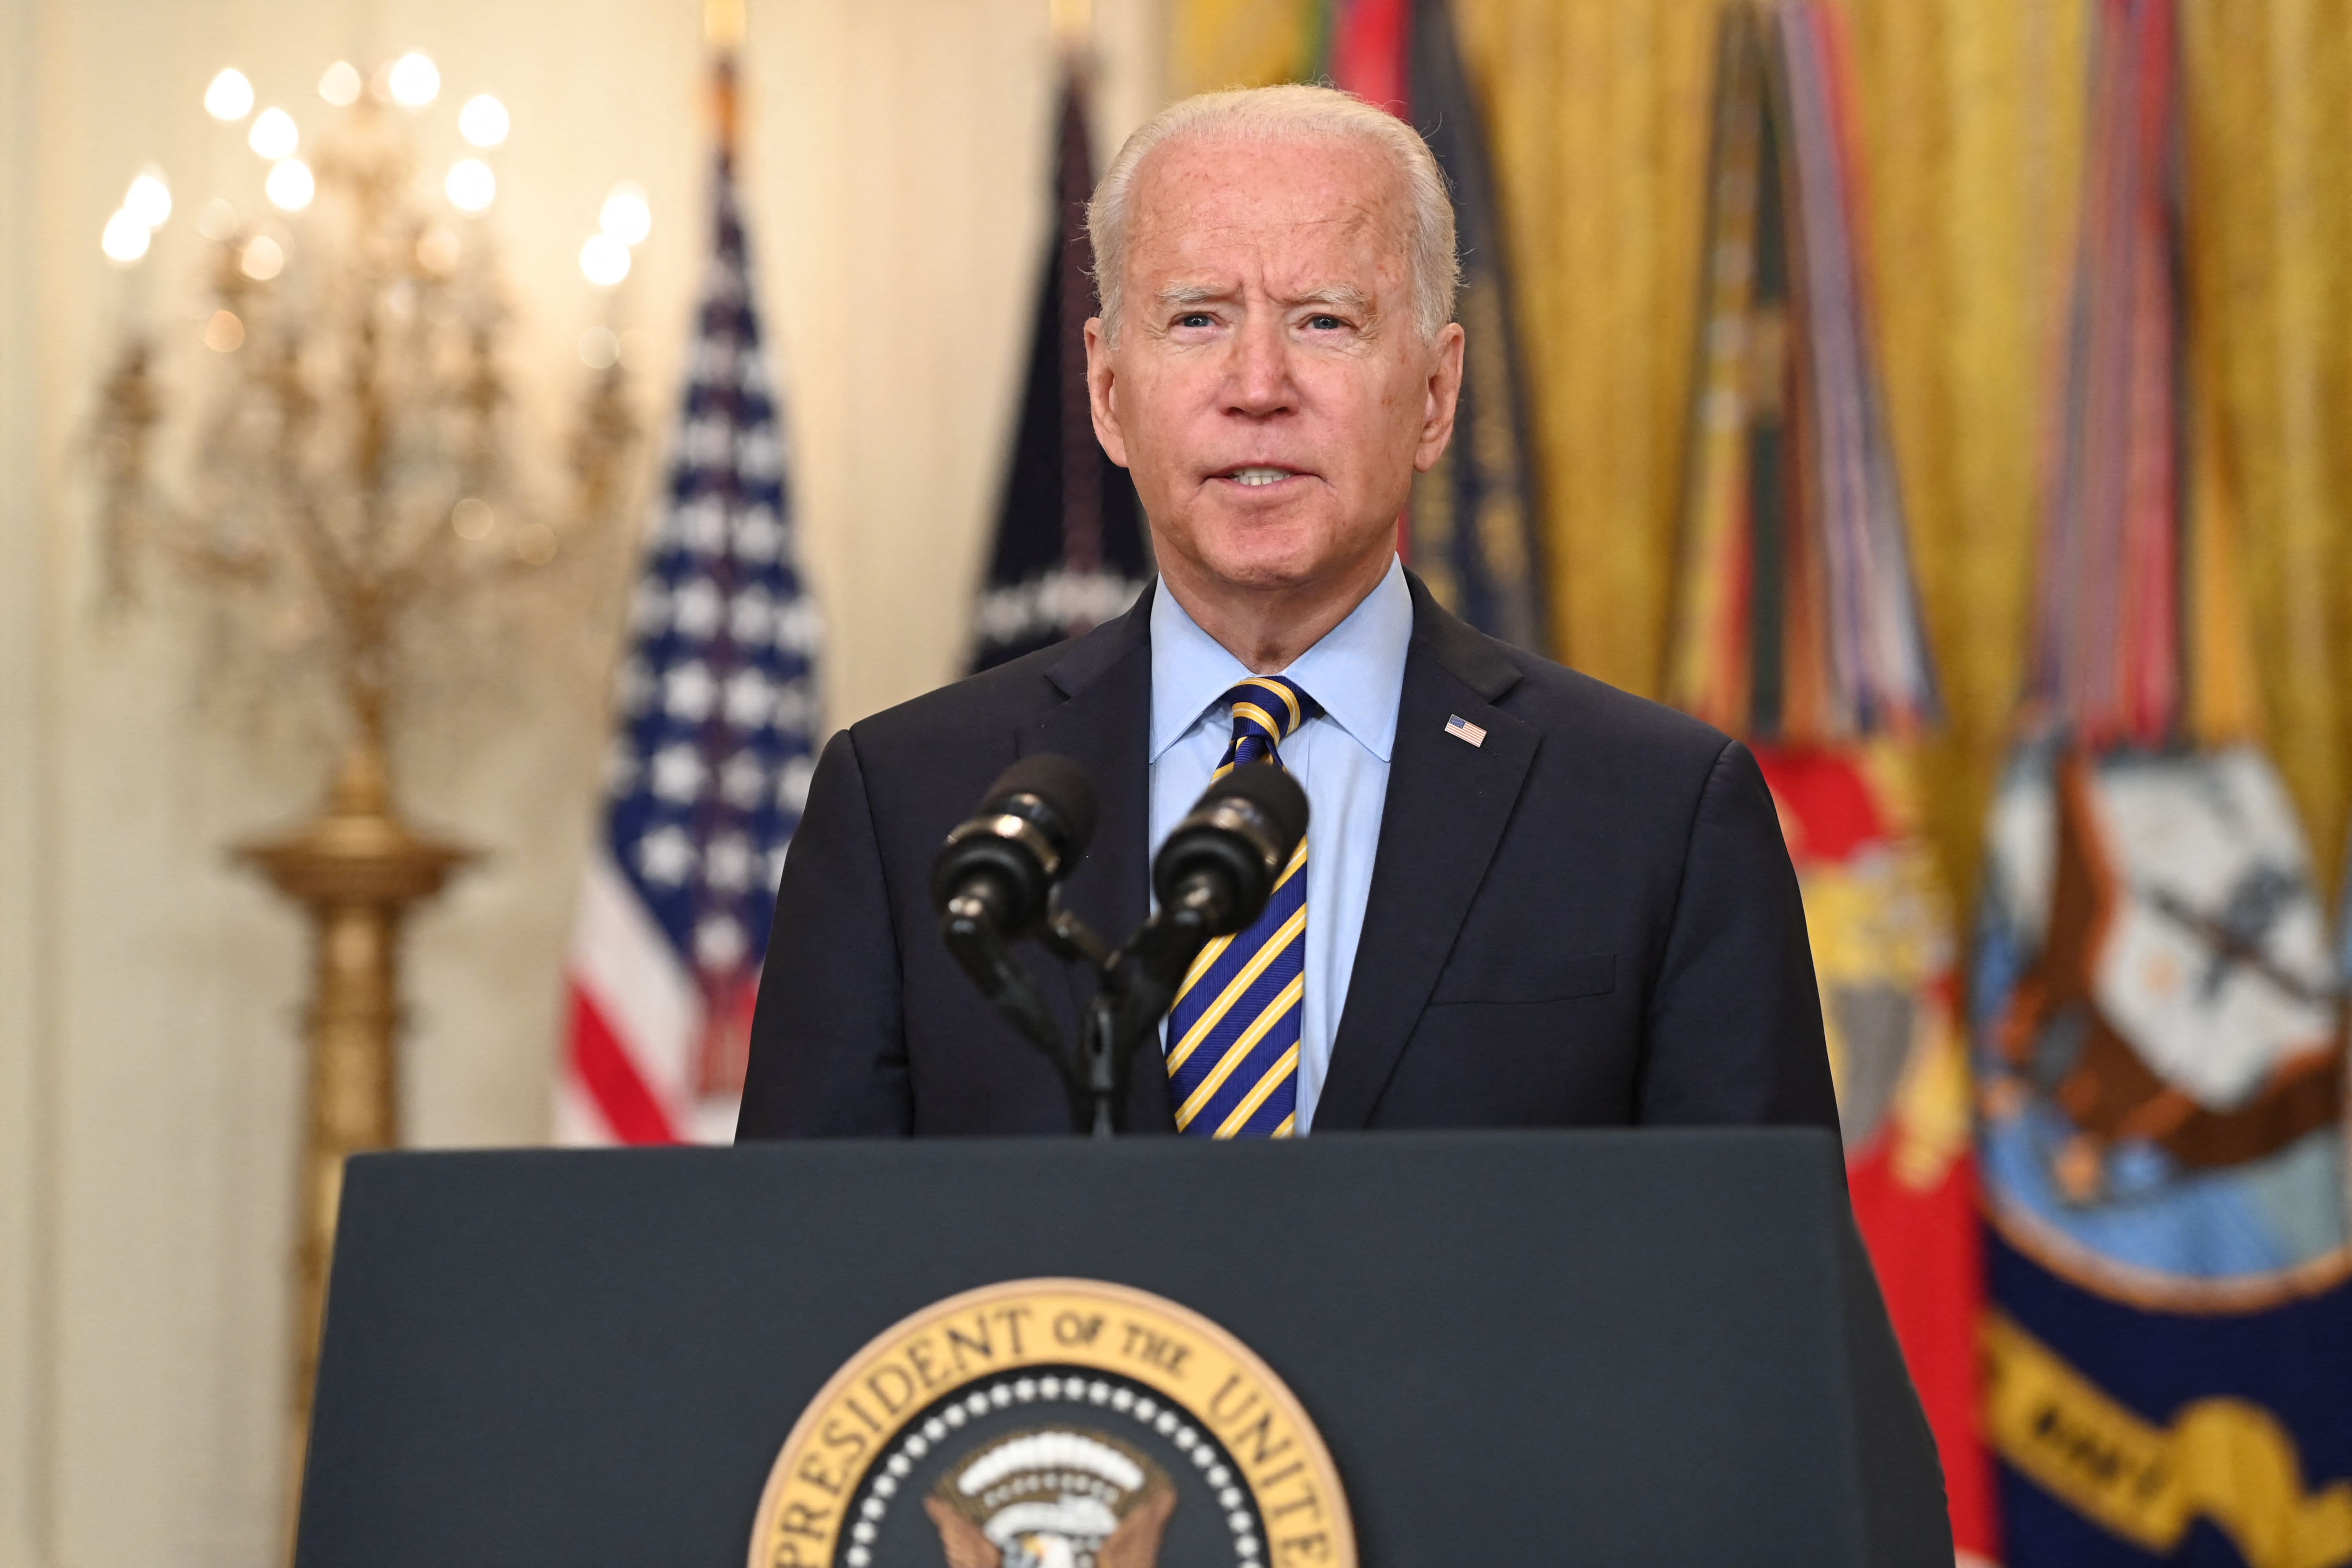 U.S. military mission in Afghanistan will end by August 31, Biden says 